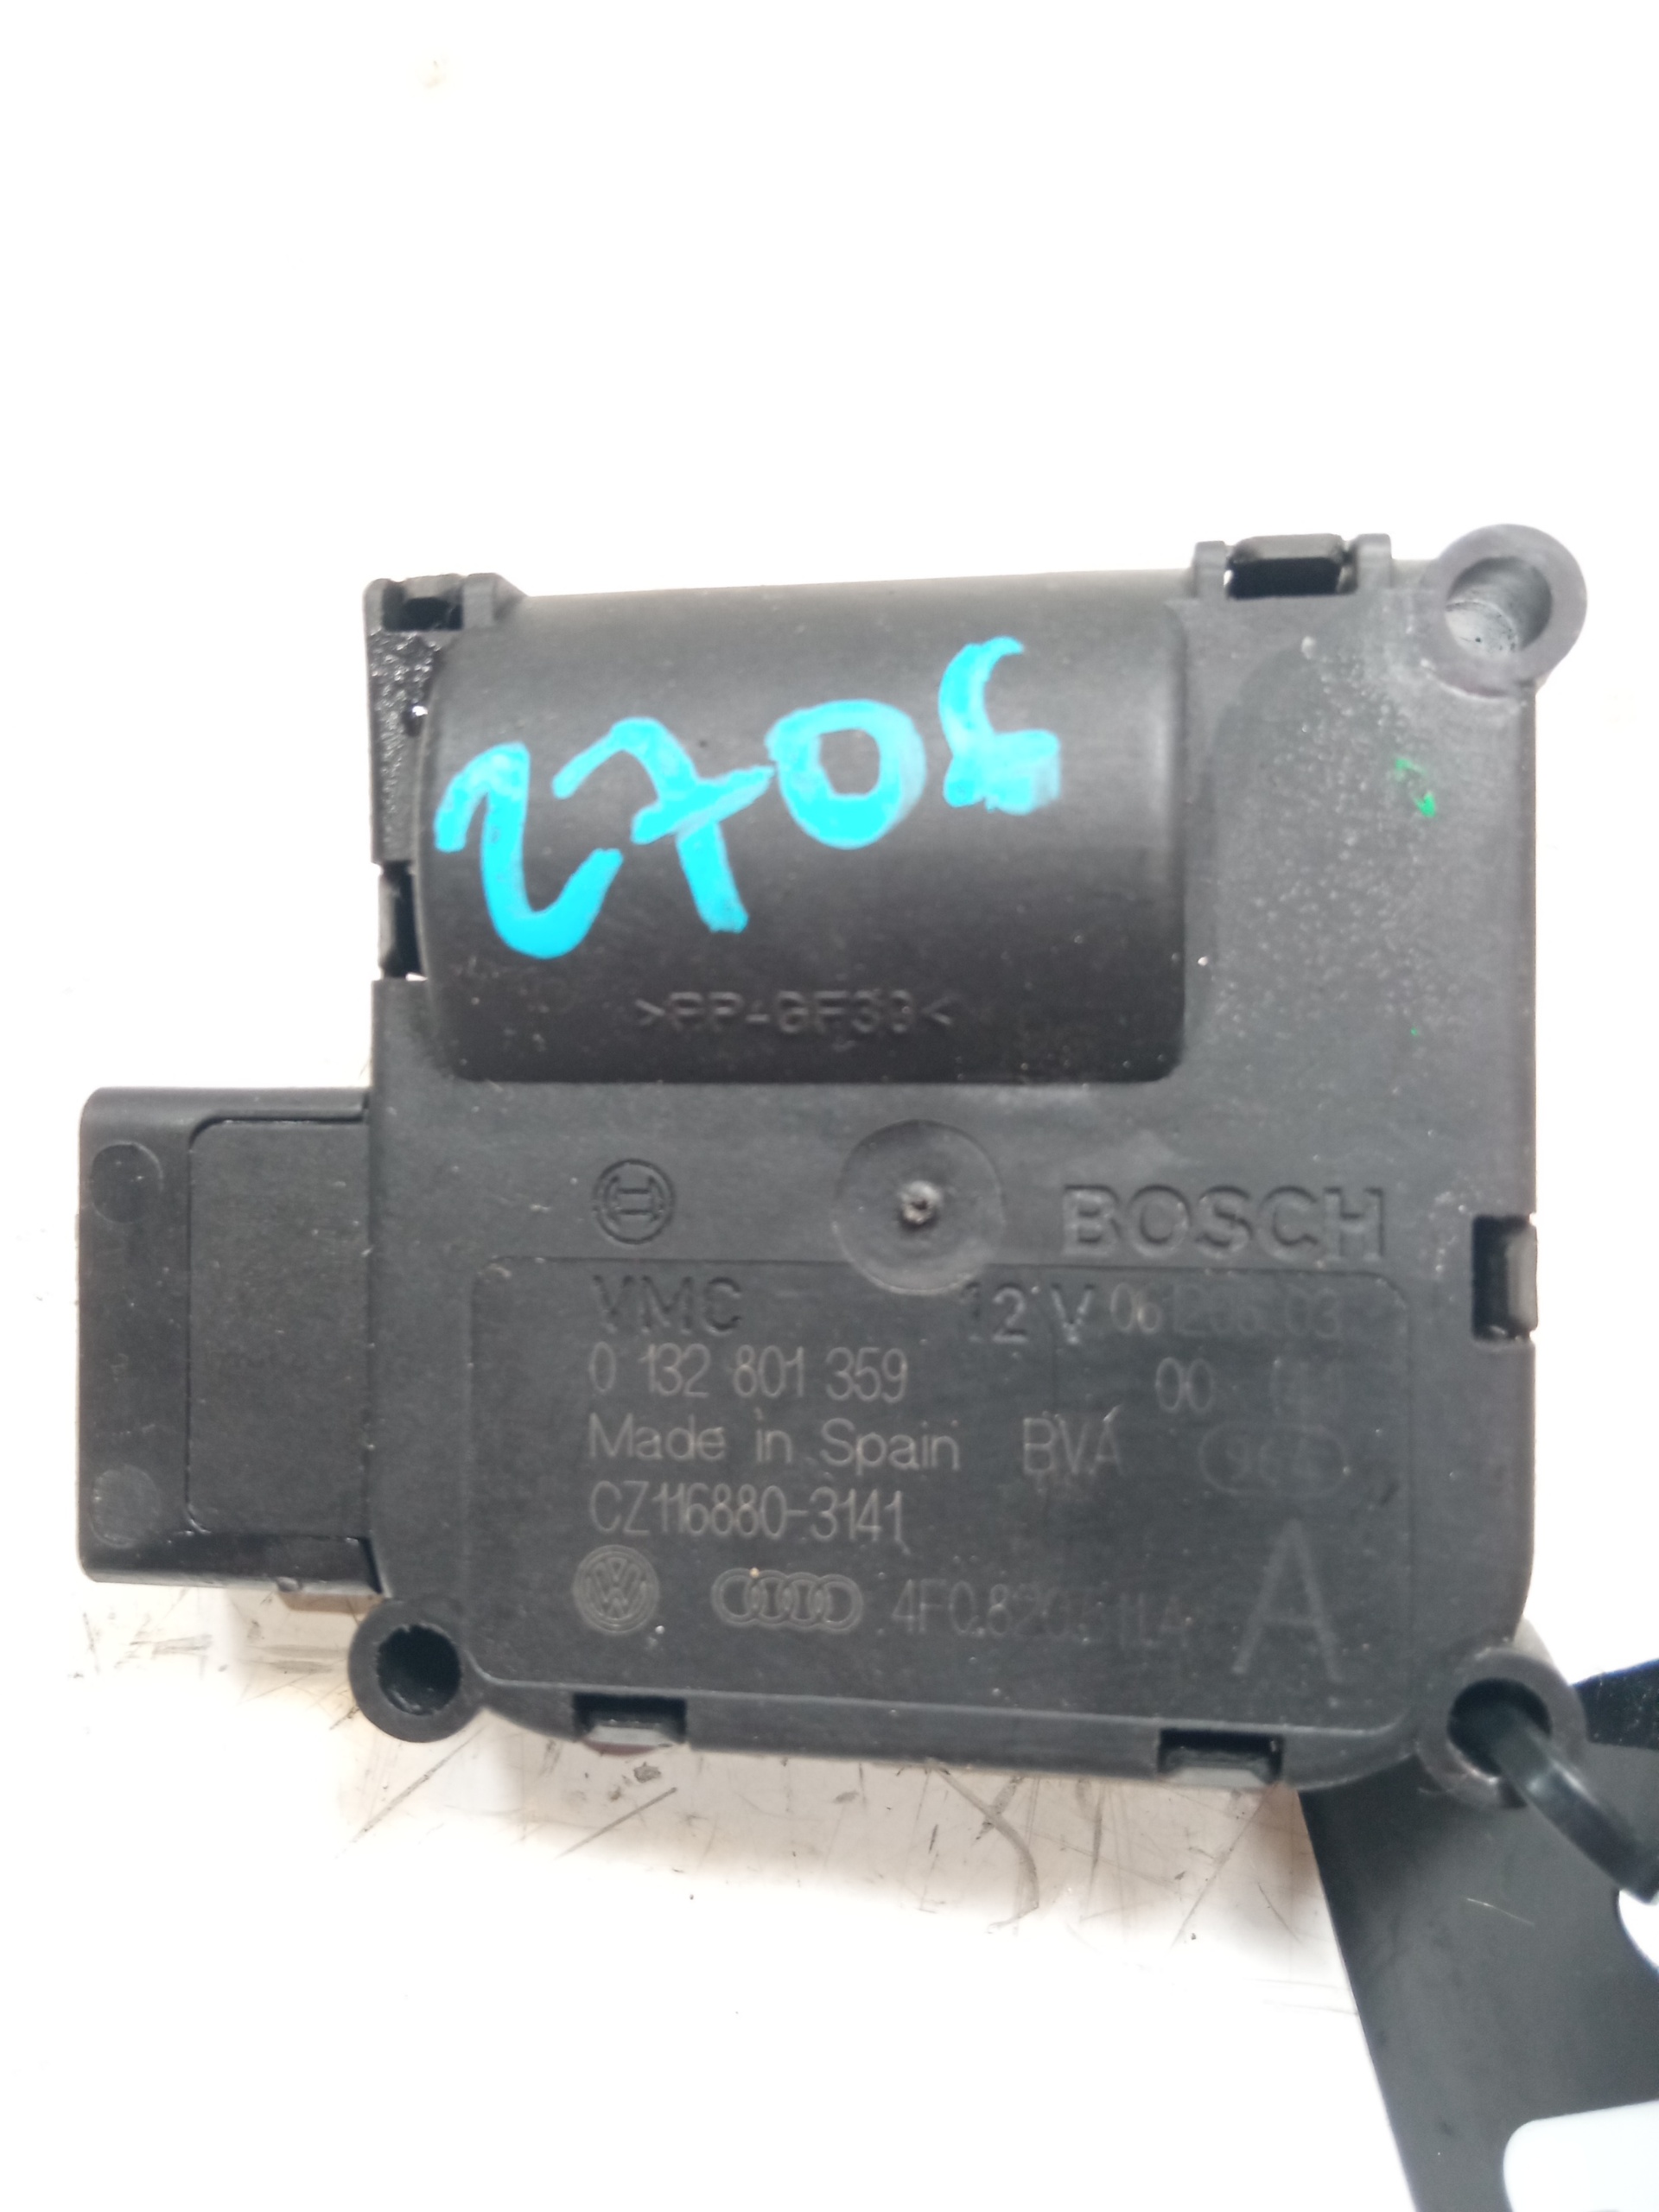 AUDI A6 C6/4F (2004-2011) Air Conditioner Air Flow Valve Motor 4F0820511A, 5PINES 24959048